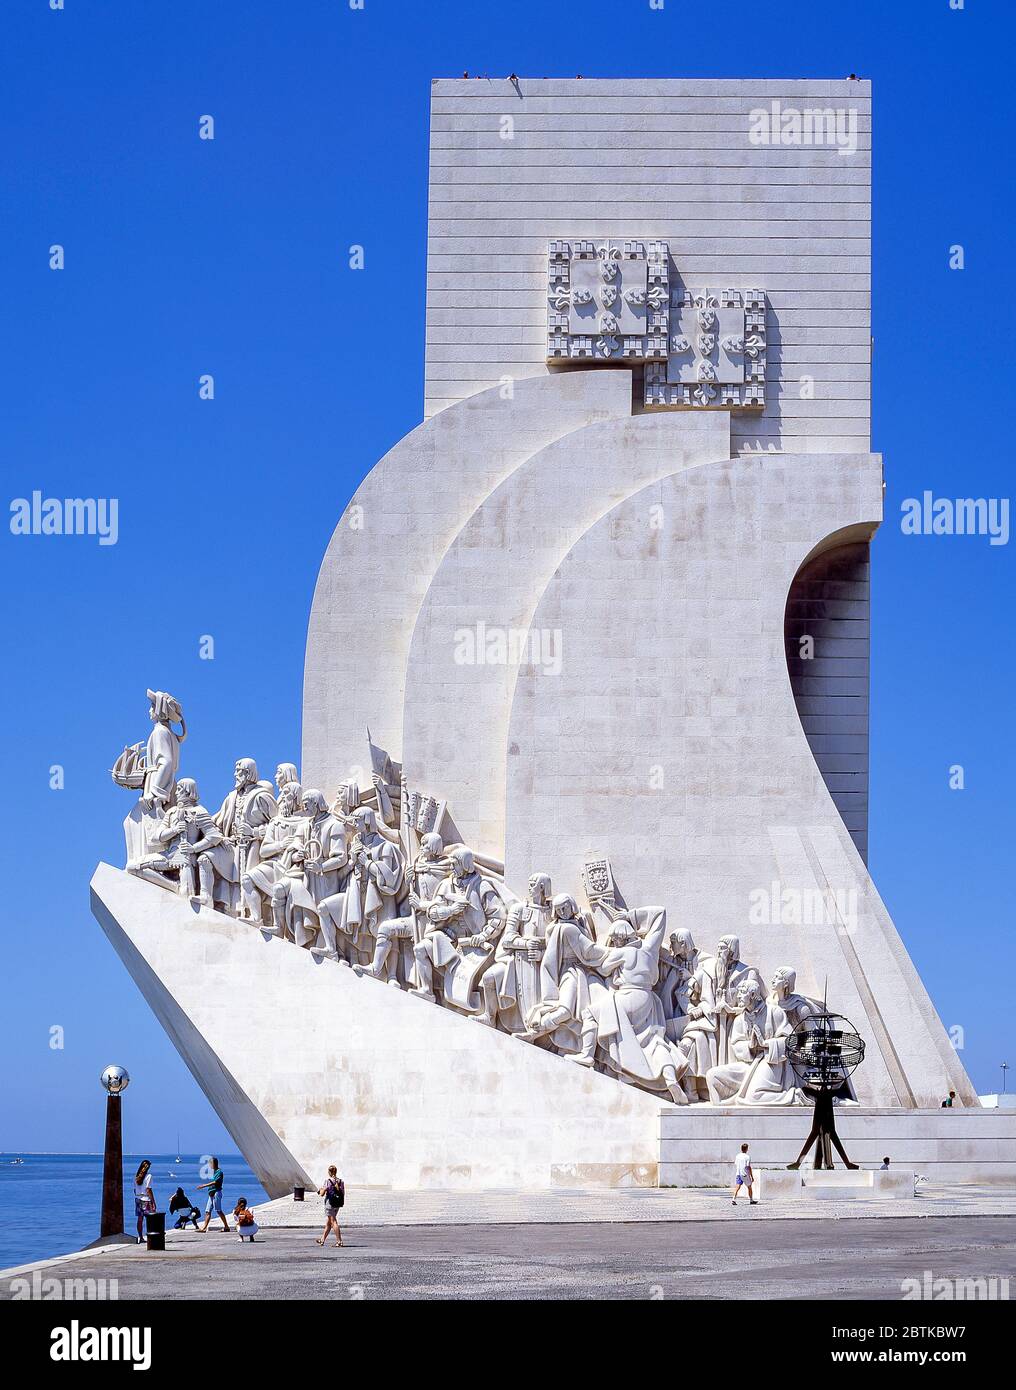 Monument to the Discoveries (Padrao dos Descobrimentos) on bank of Tagus River, Belem District, Lisbon, Portugal Stock Photo